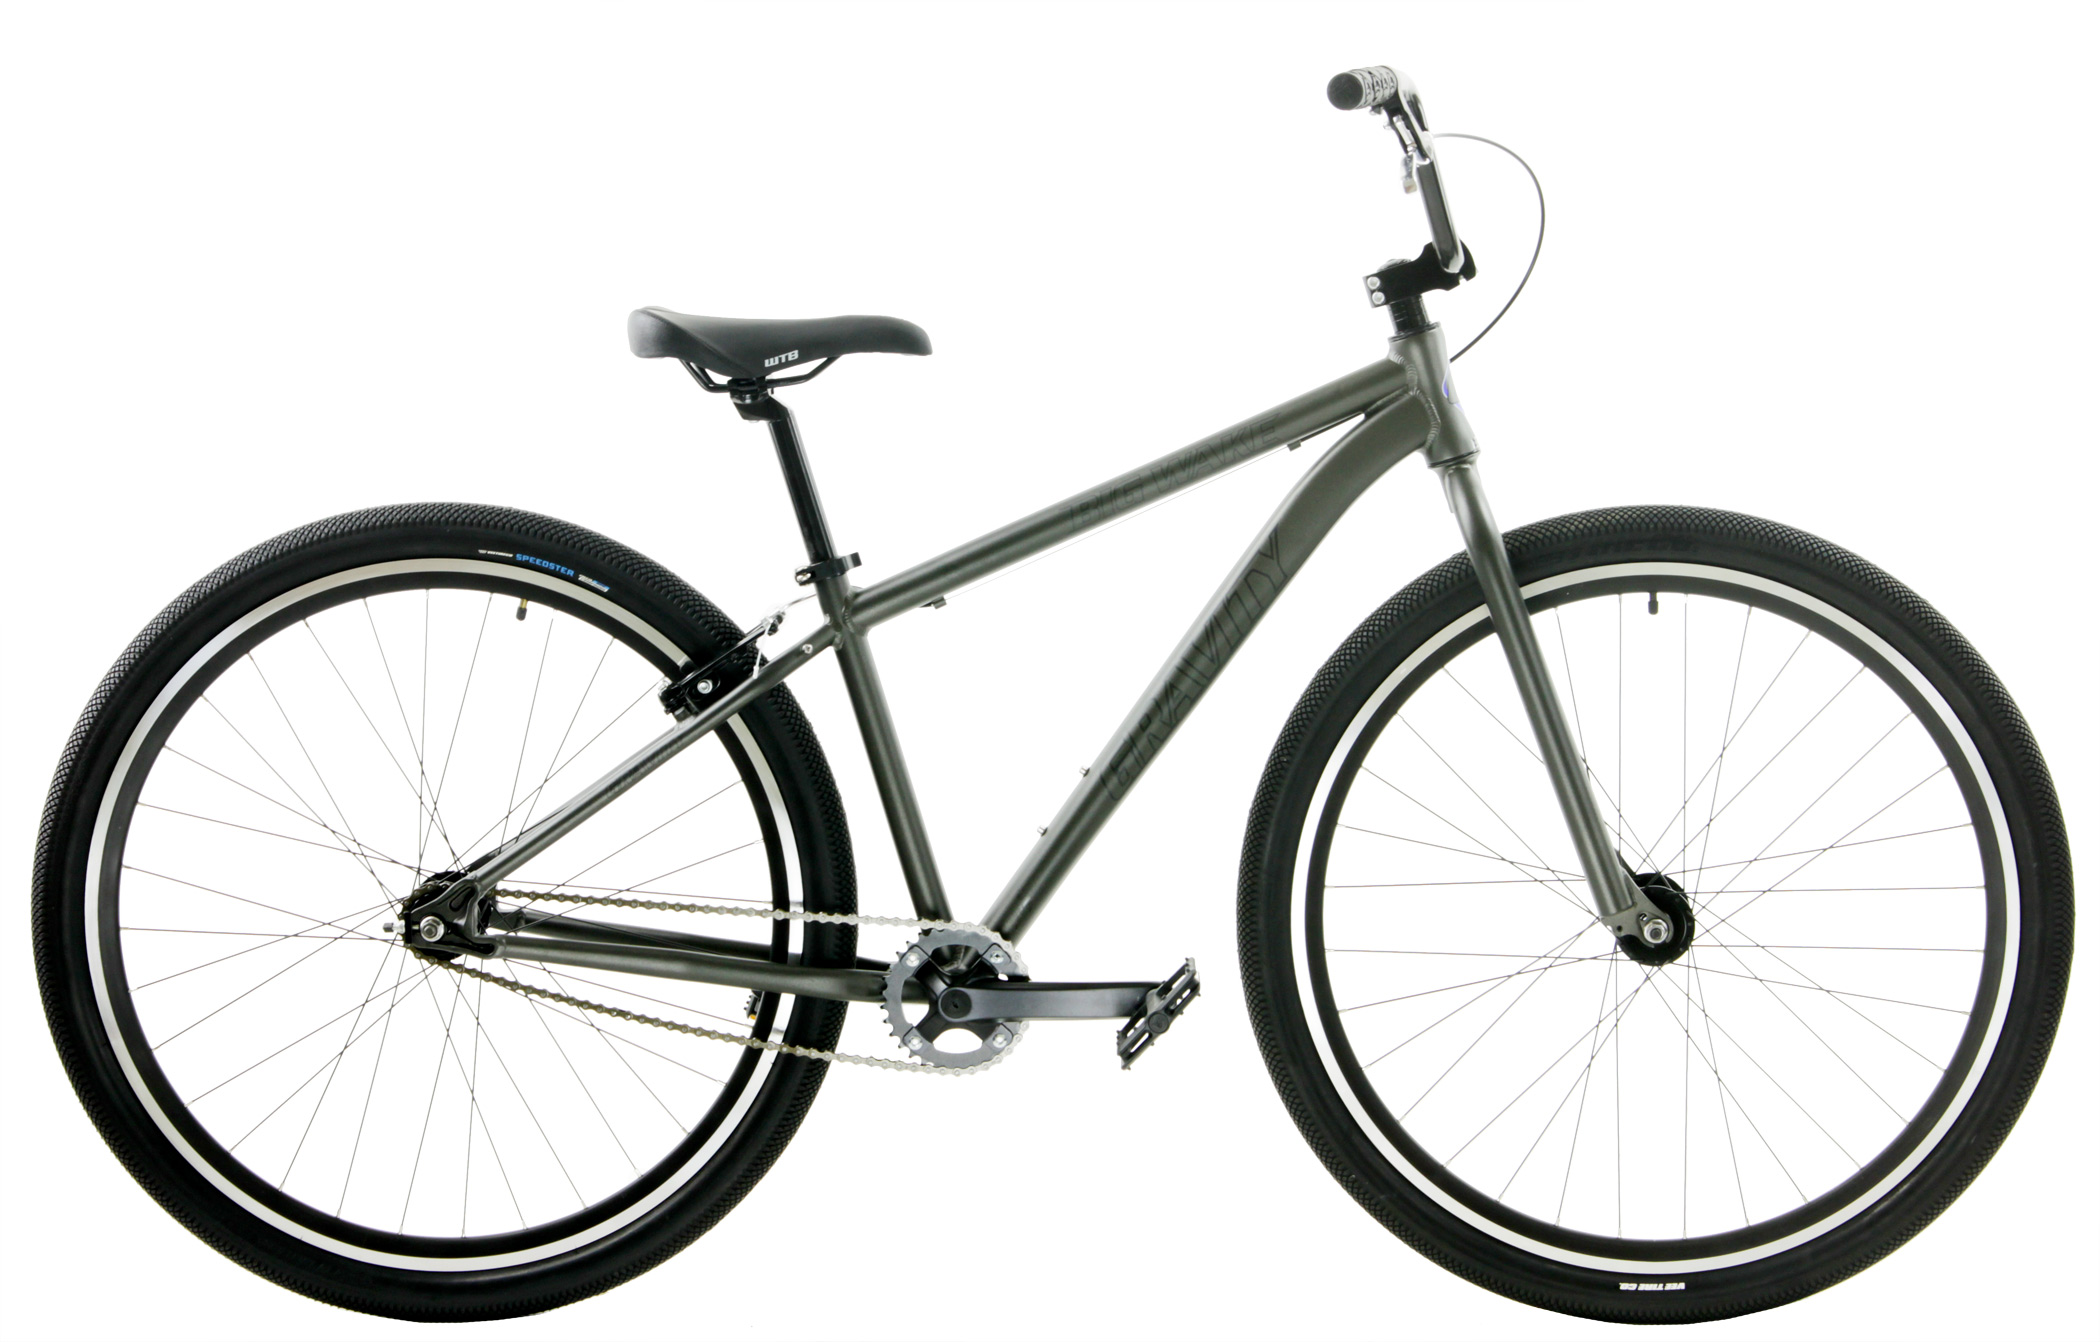 revolutie aluminium zin Save up to 60% off new Adult BMX ALL BIKES FREE SHIP 48 Save Up to 60% Off  Gravity Big Wake Bicycles Single Speed Adult BMX Bikes, BMX Cruiser Bikes  Fast, Strong